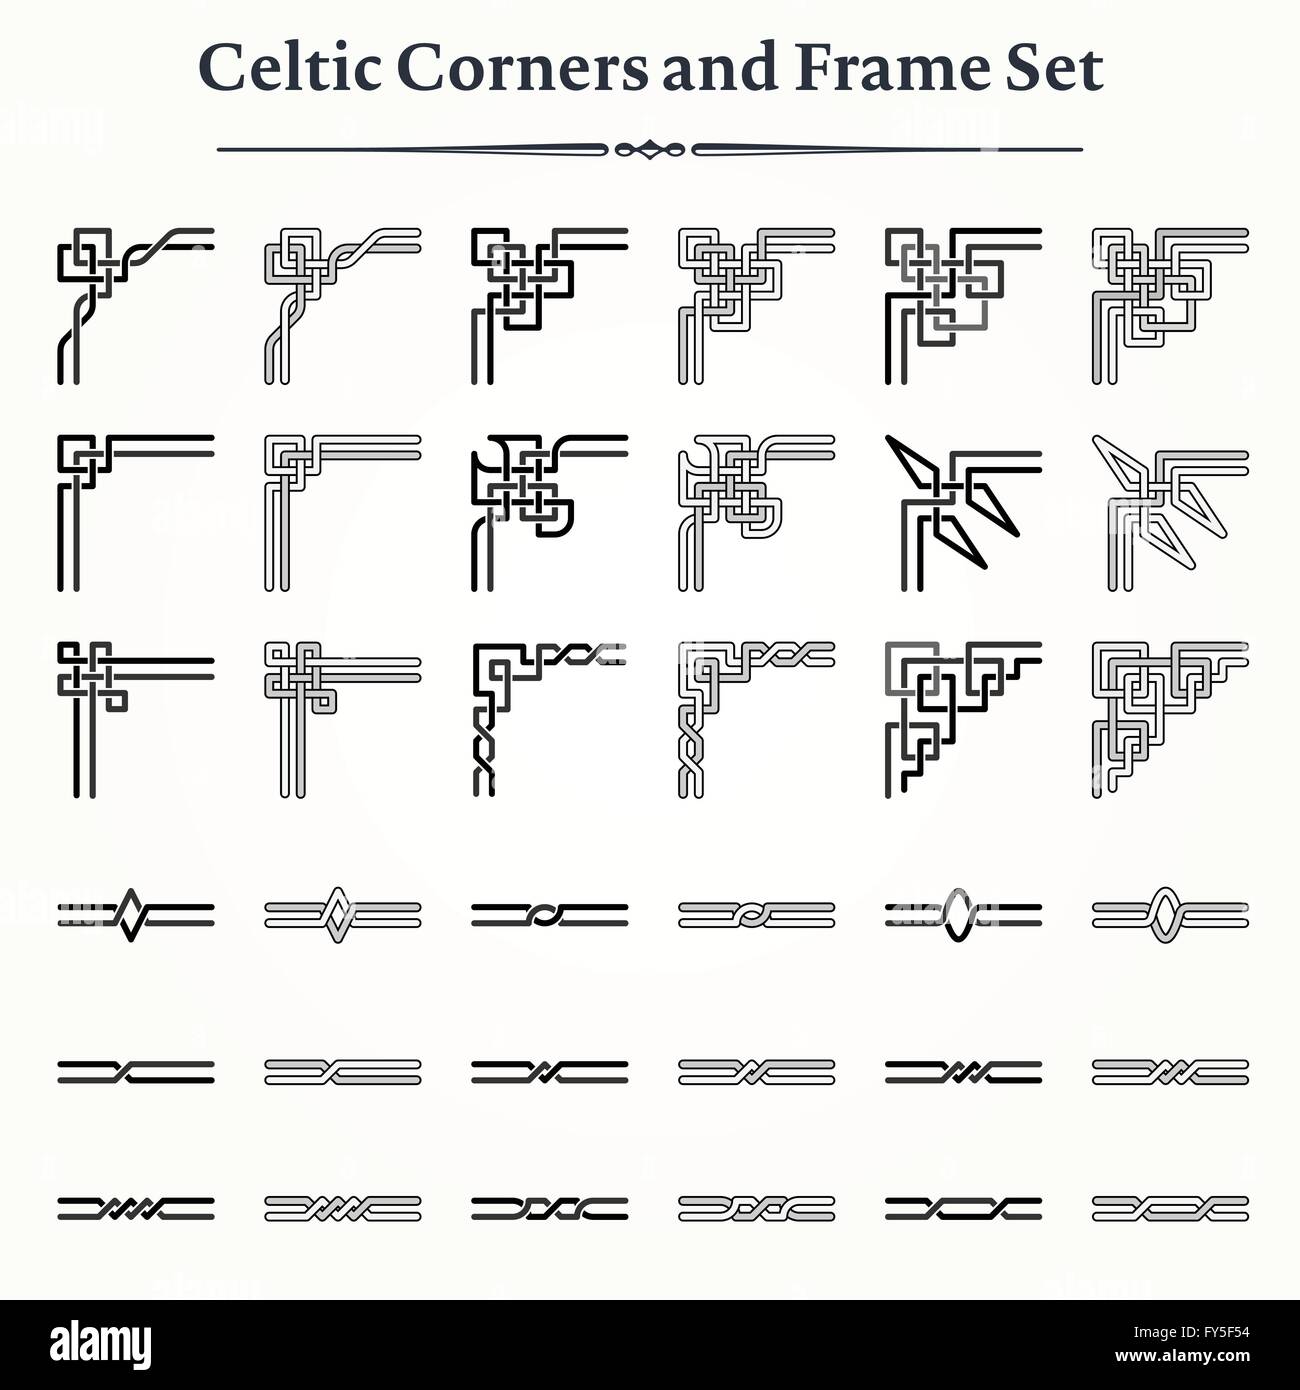 Collection of decorative Celtic knot corners patterns Stock Vector